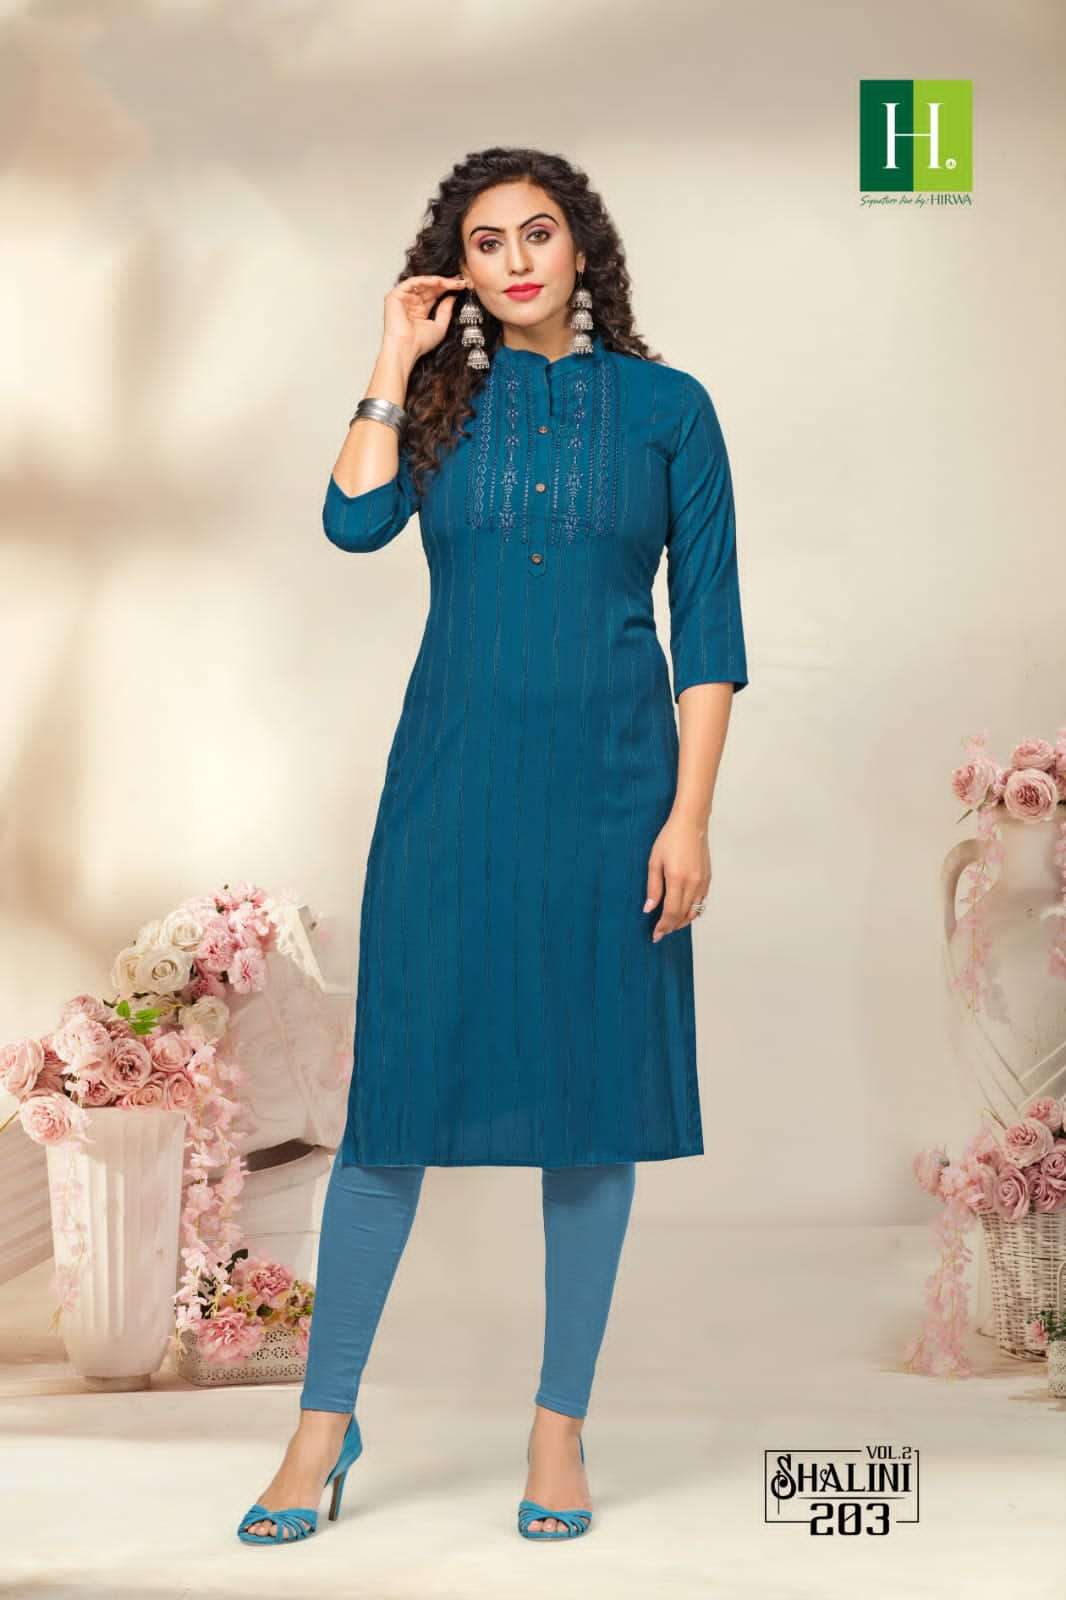 Unique and Designer Straight Kurtis at one place | by John Muller | Medium